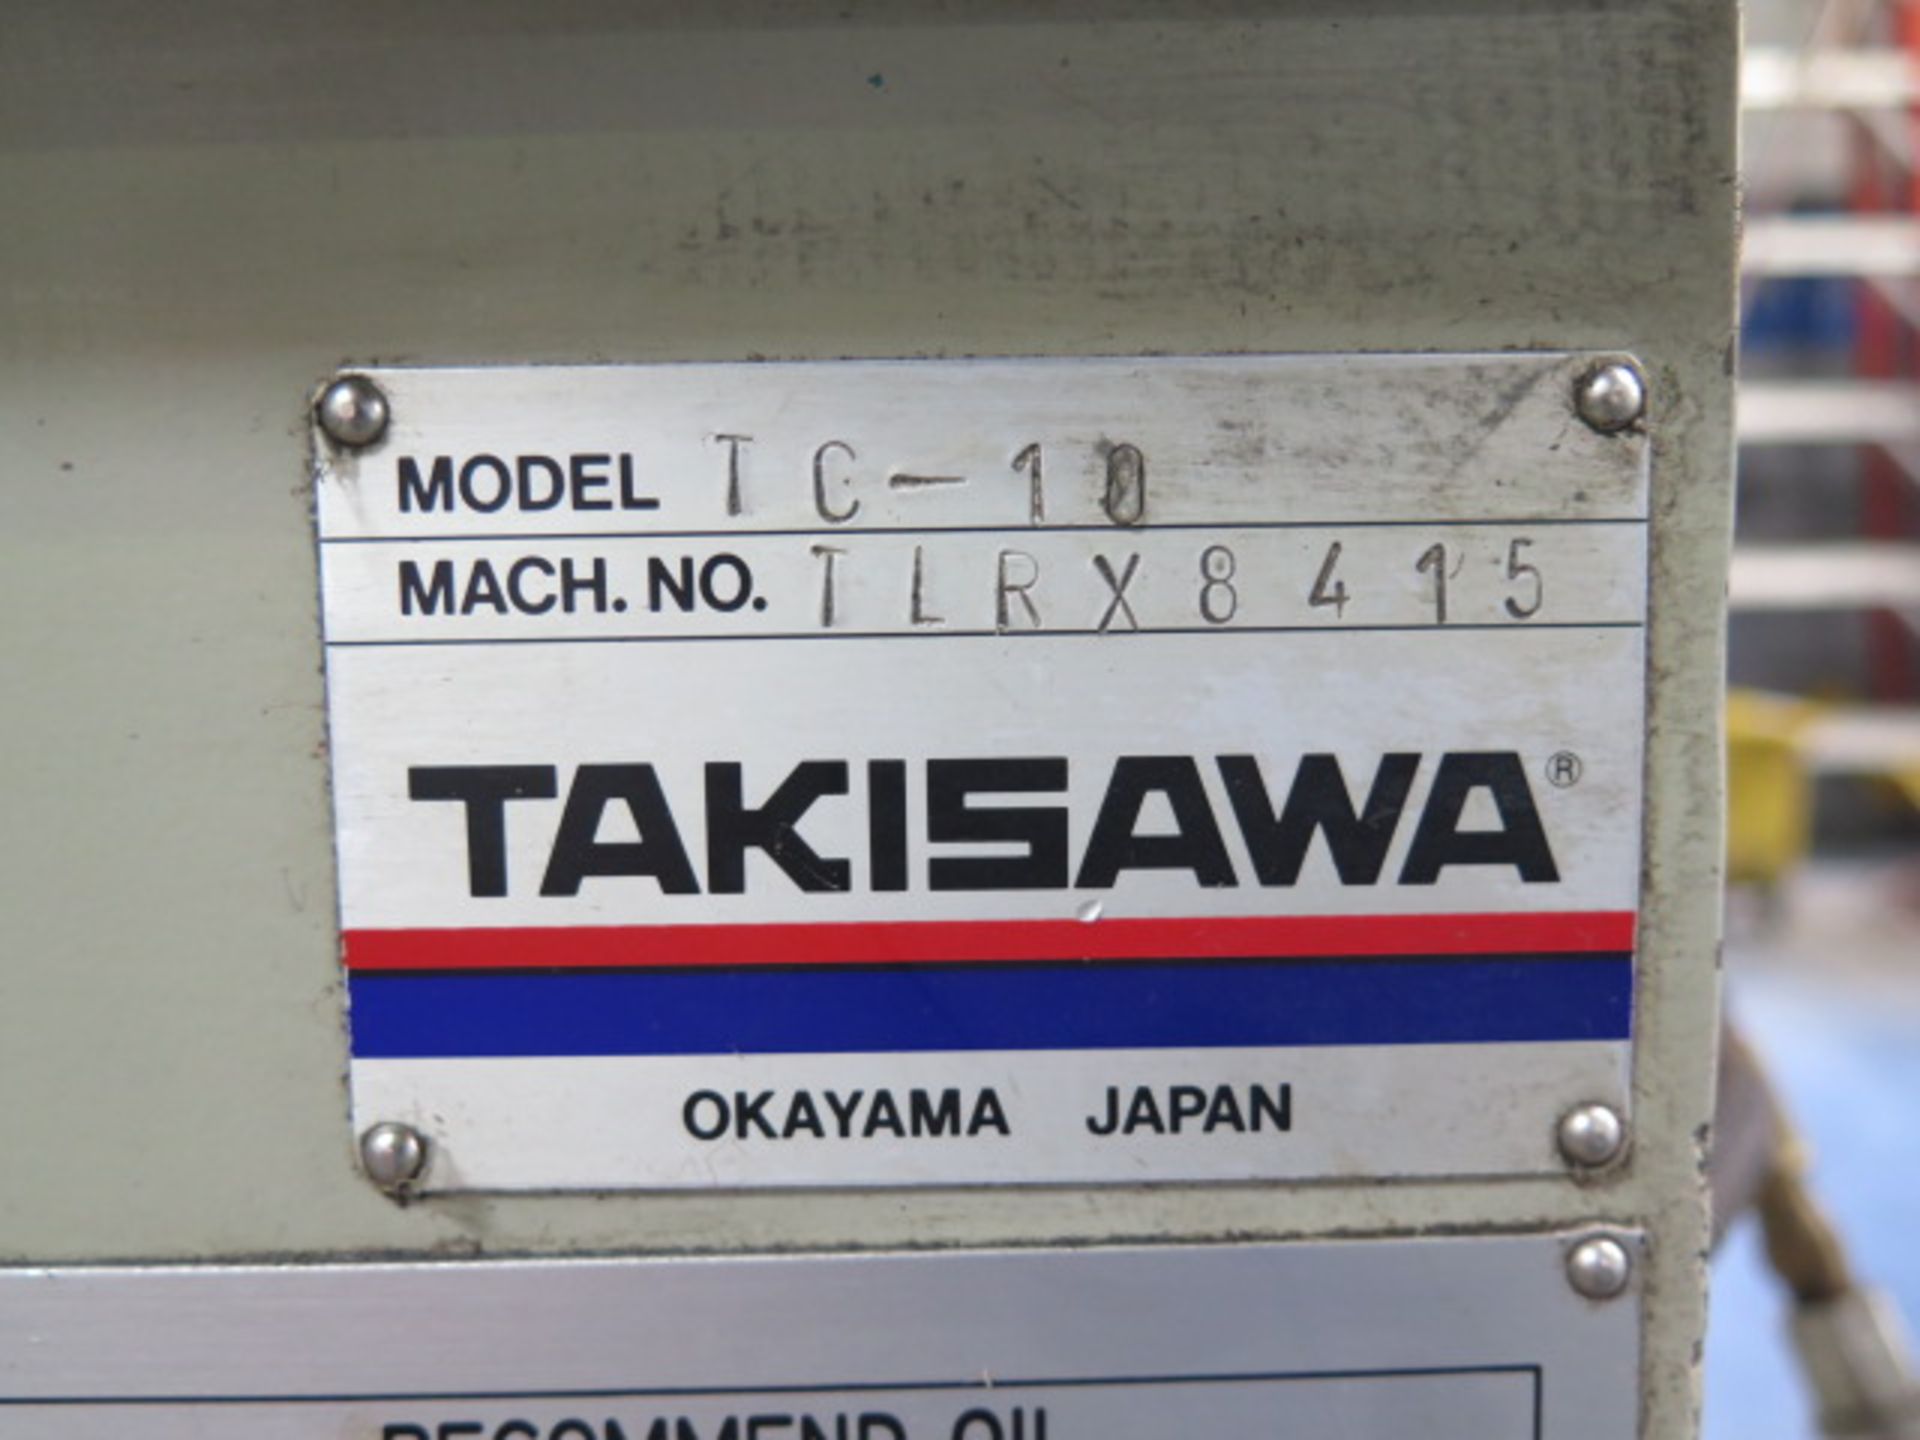 Takisawa TC-10 CNC Turning Center s/n TLRX8415 w/ Fanuc 21-T Controls, 12-Station Turret, SOLD AS IS - Image 11 of 11